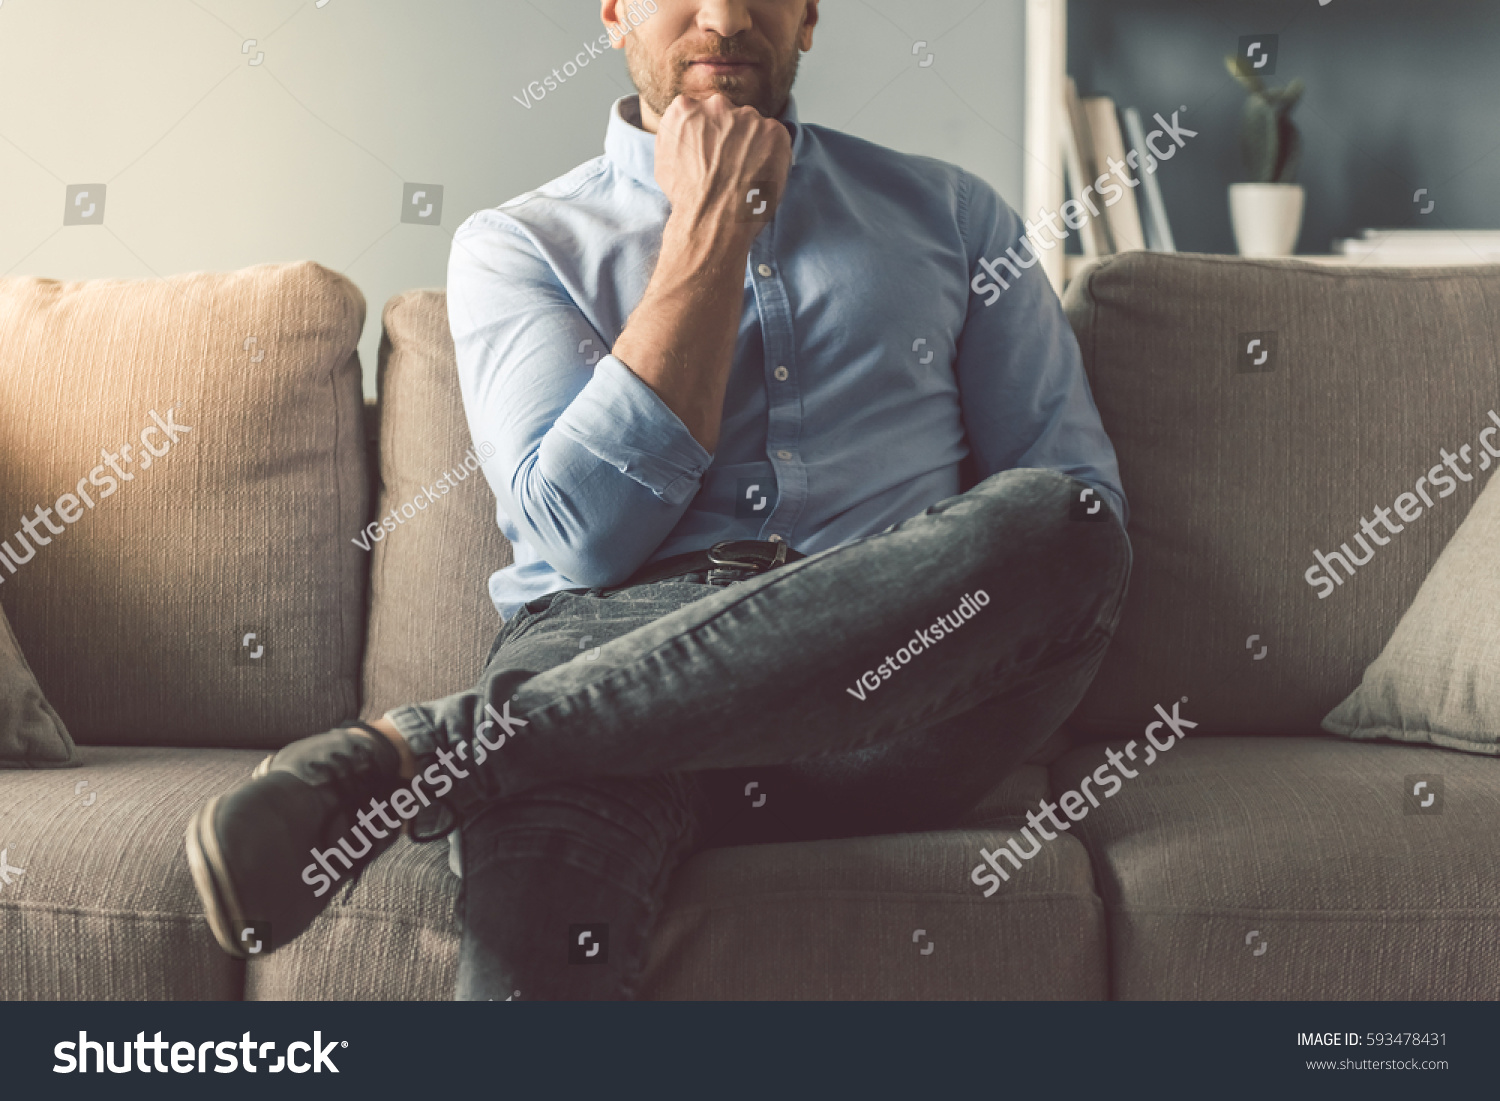 Cropped image of handsome man sitting on couch at home #593478431